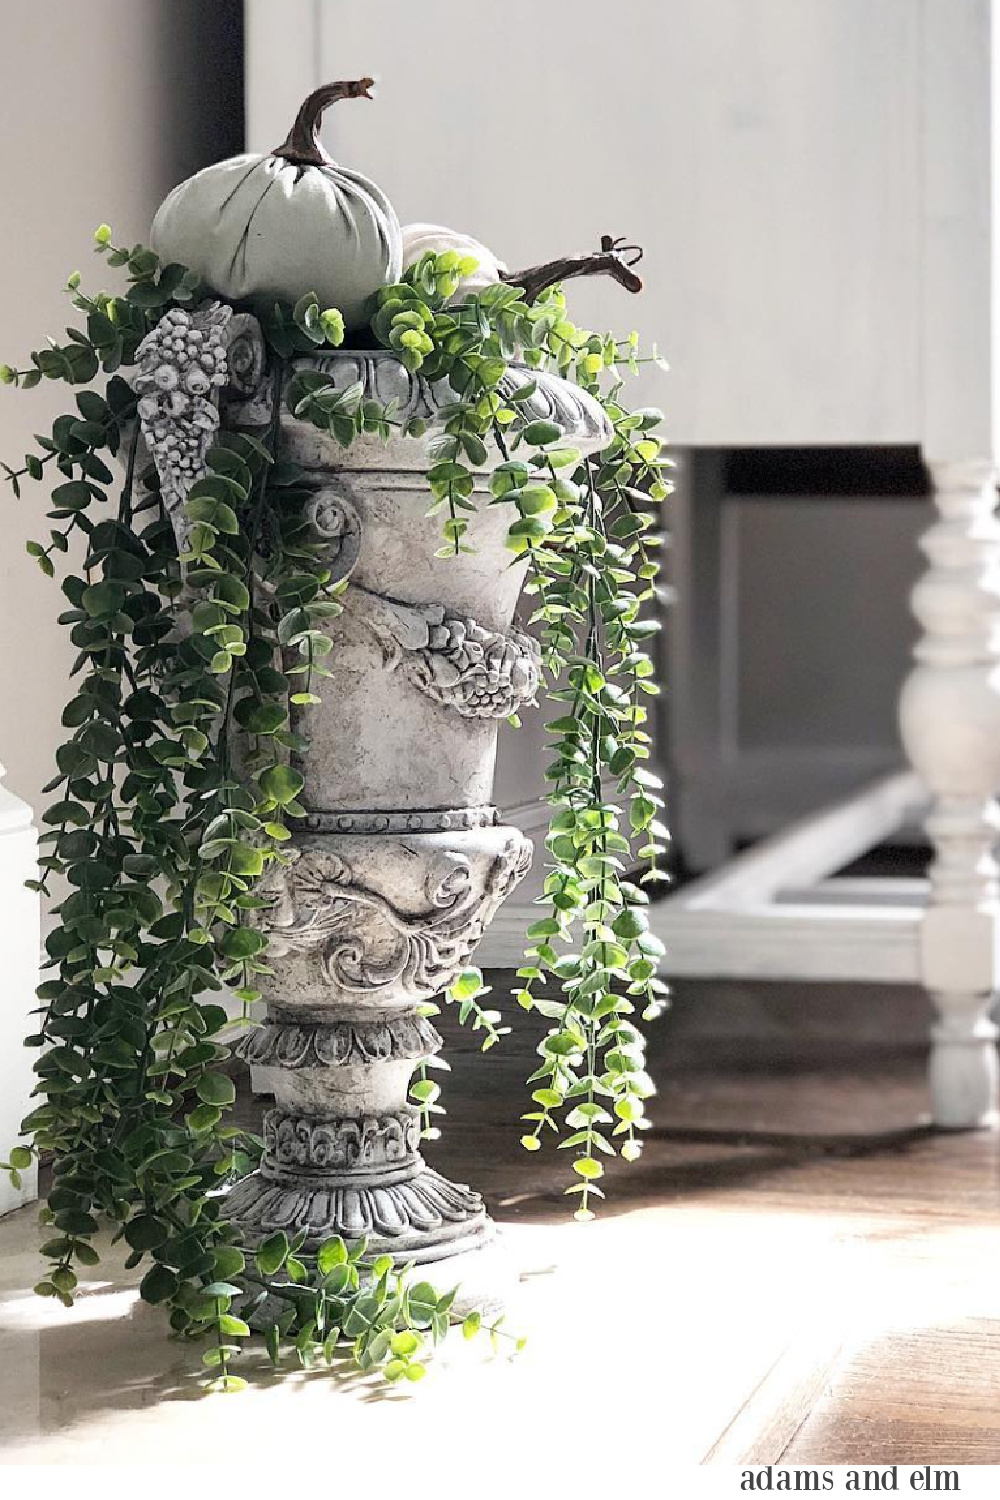 This thrifted DIY French country fall planter arrangement is brilliant and so elegant - Adams and Elm Home. #frenchcountry #falldecor #fallplanter #fallflorals #floralarrangements